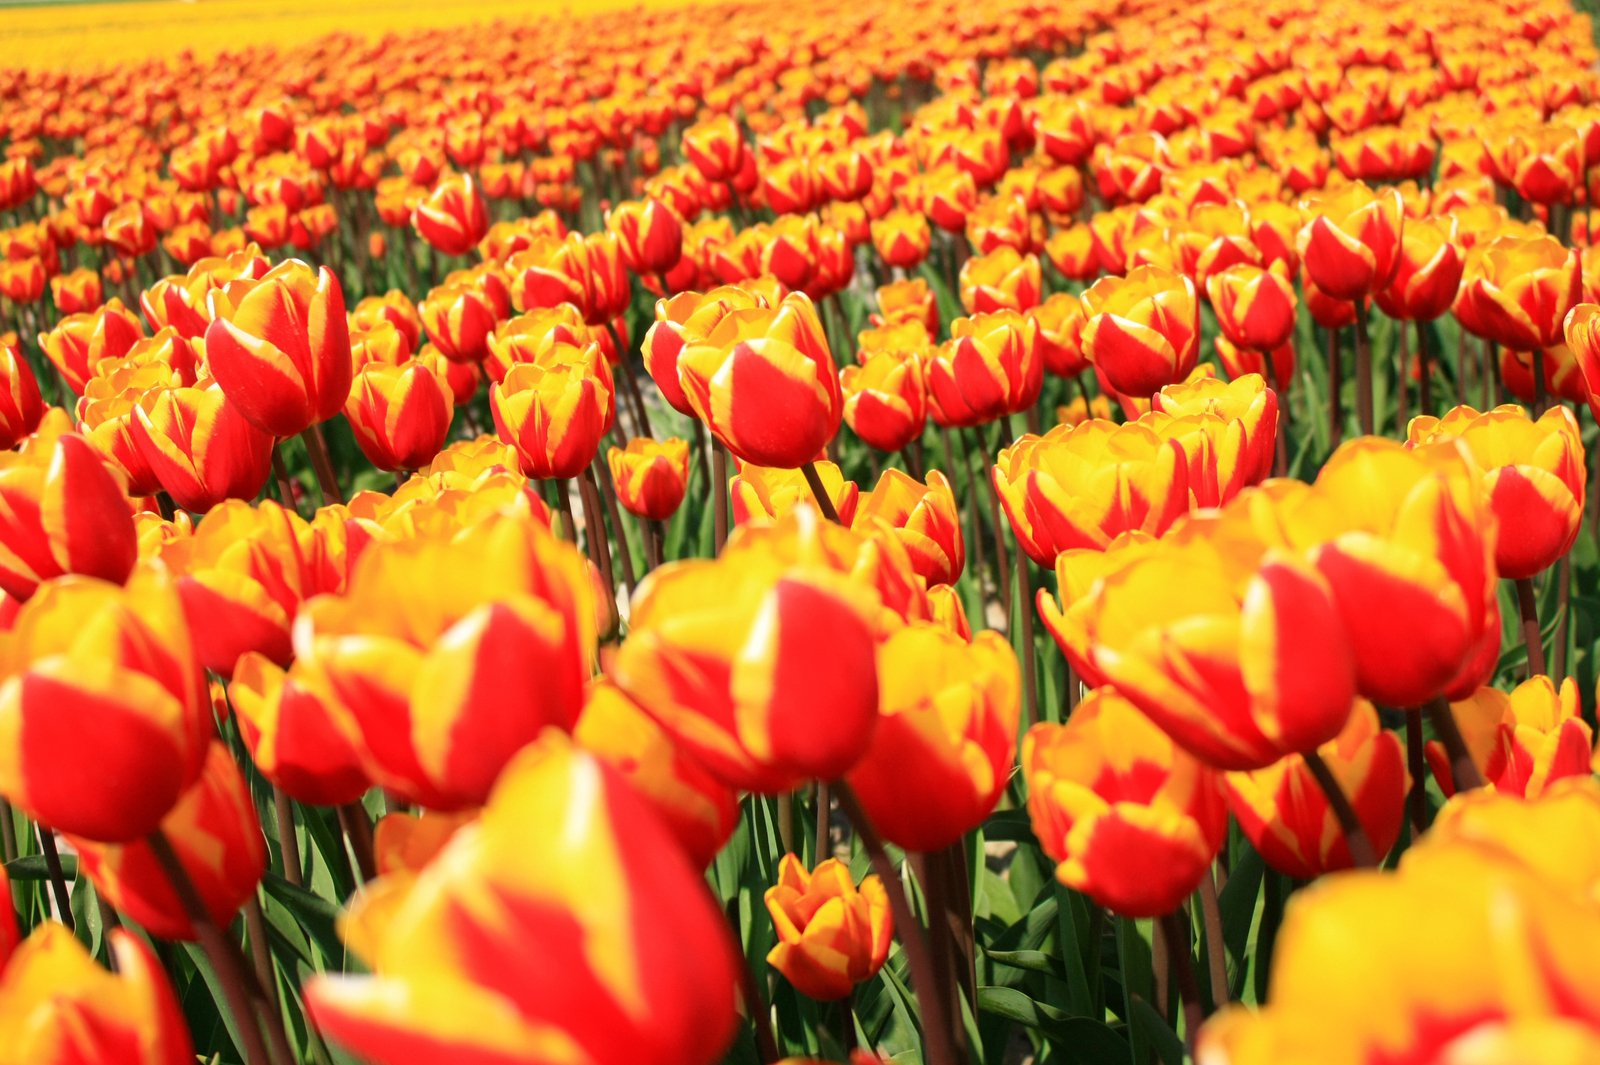 yellow and red tulips in a field with green grass